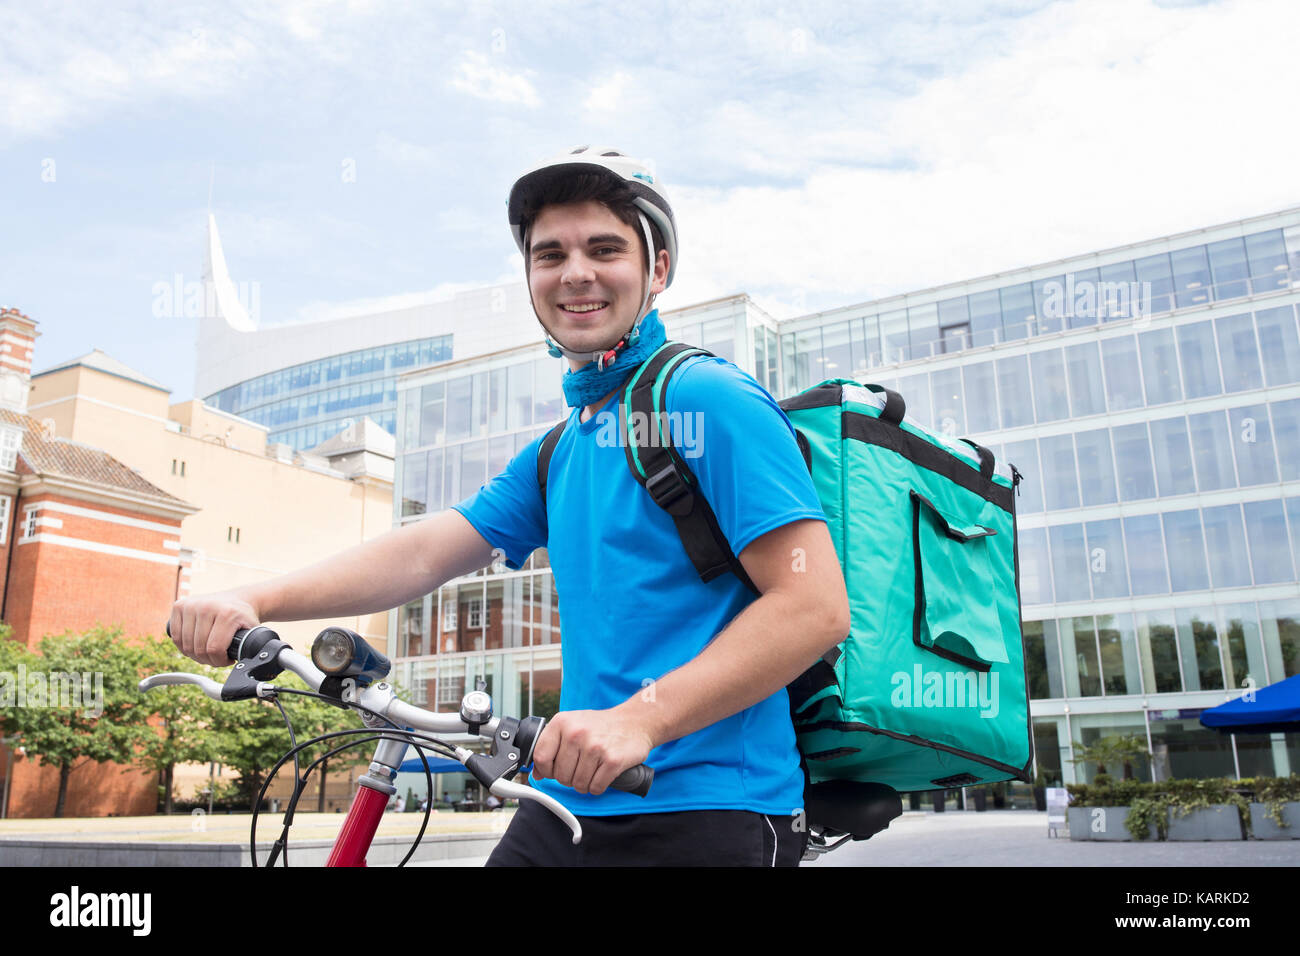 Portrait Of Courier On Bicycle Delivering Food In City Stock Photo